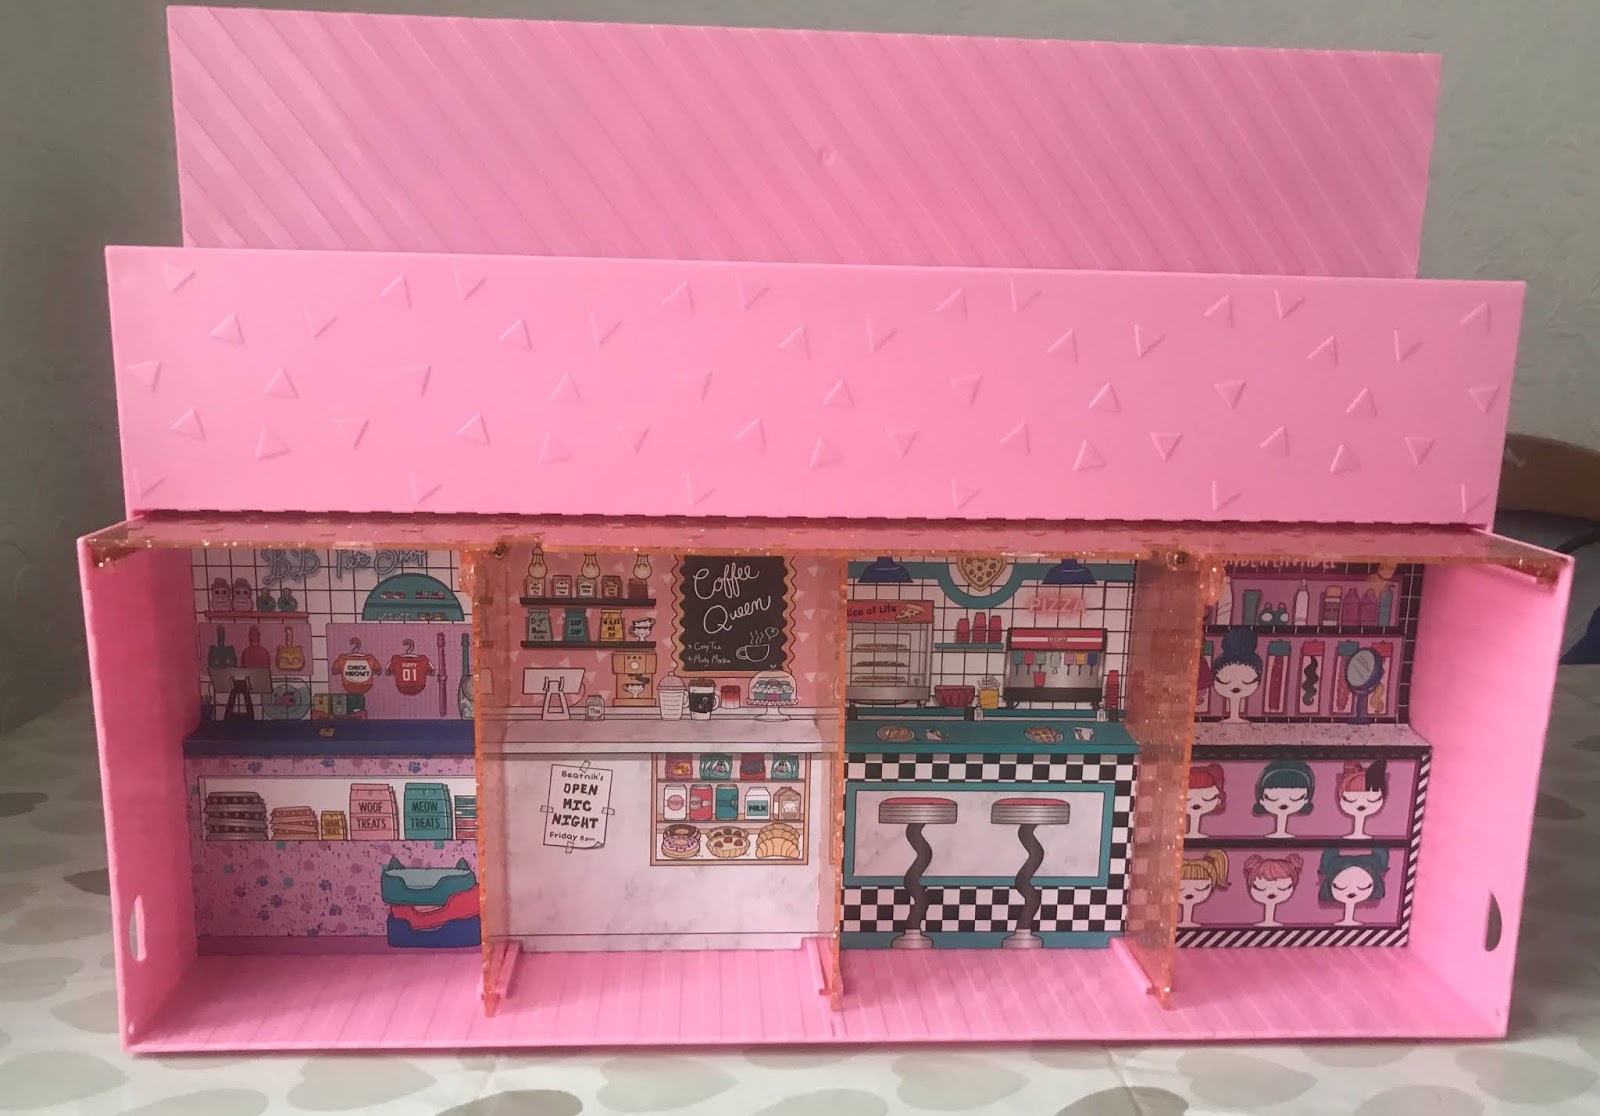 L.O.L. Surprise Pop-Up Store Playset Review Newcastle Family Life